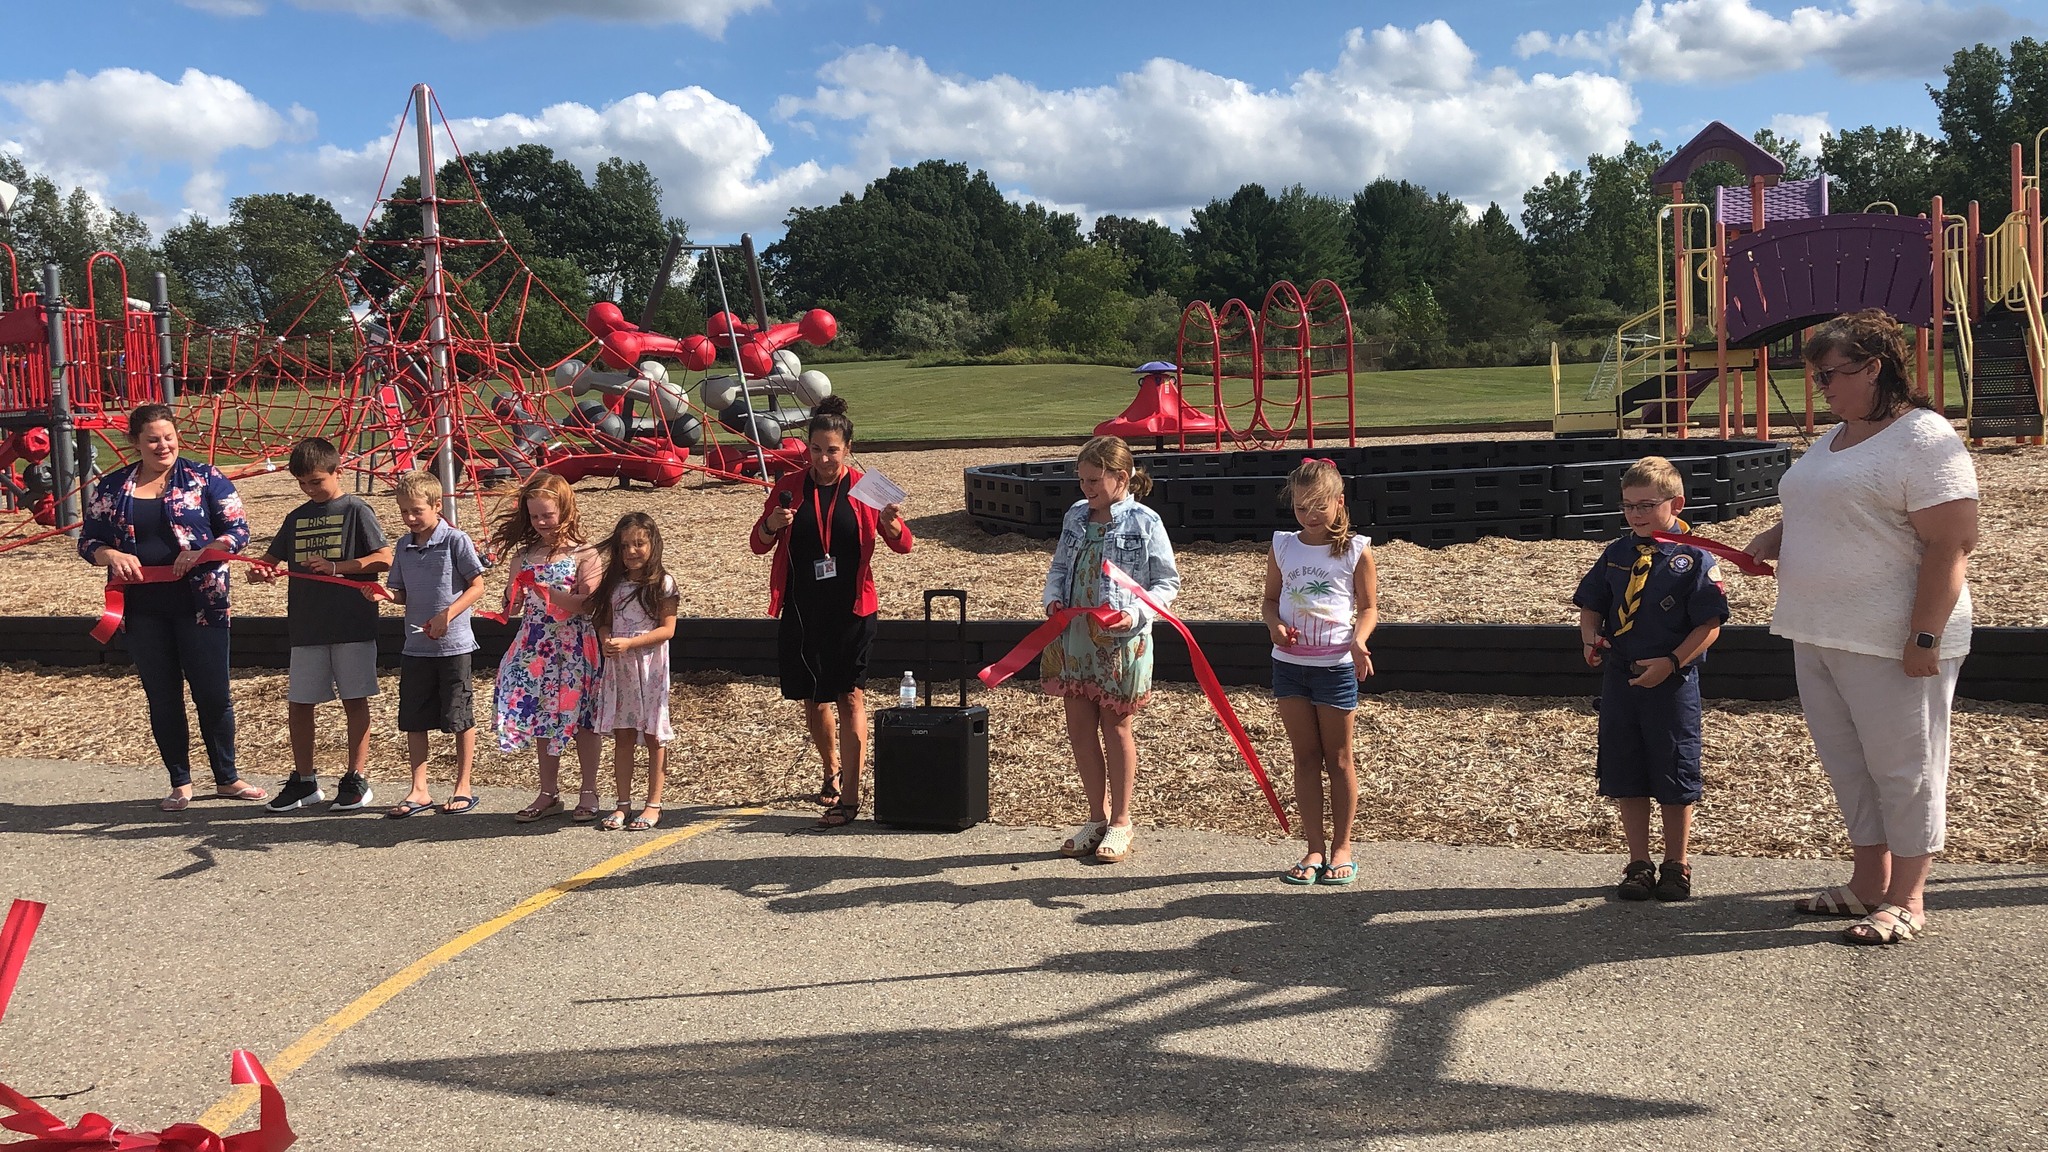 Parents and students with Mrs. Kott all cutting the ribbon at the same time.